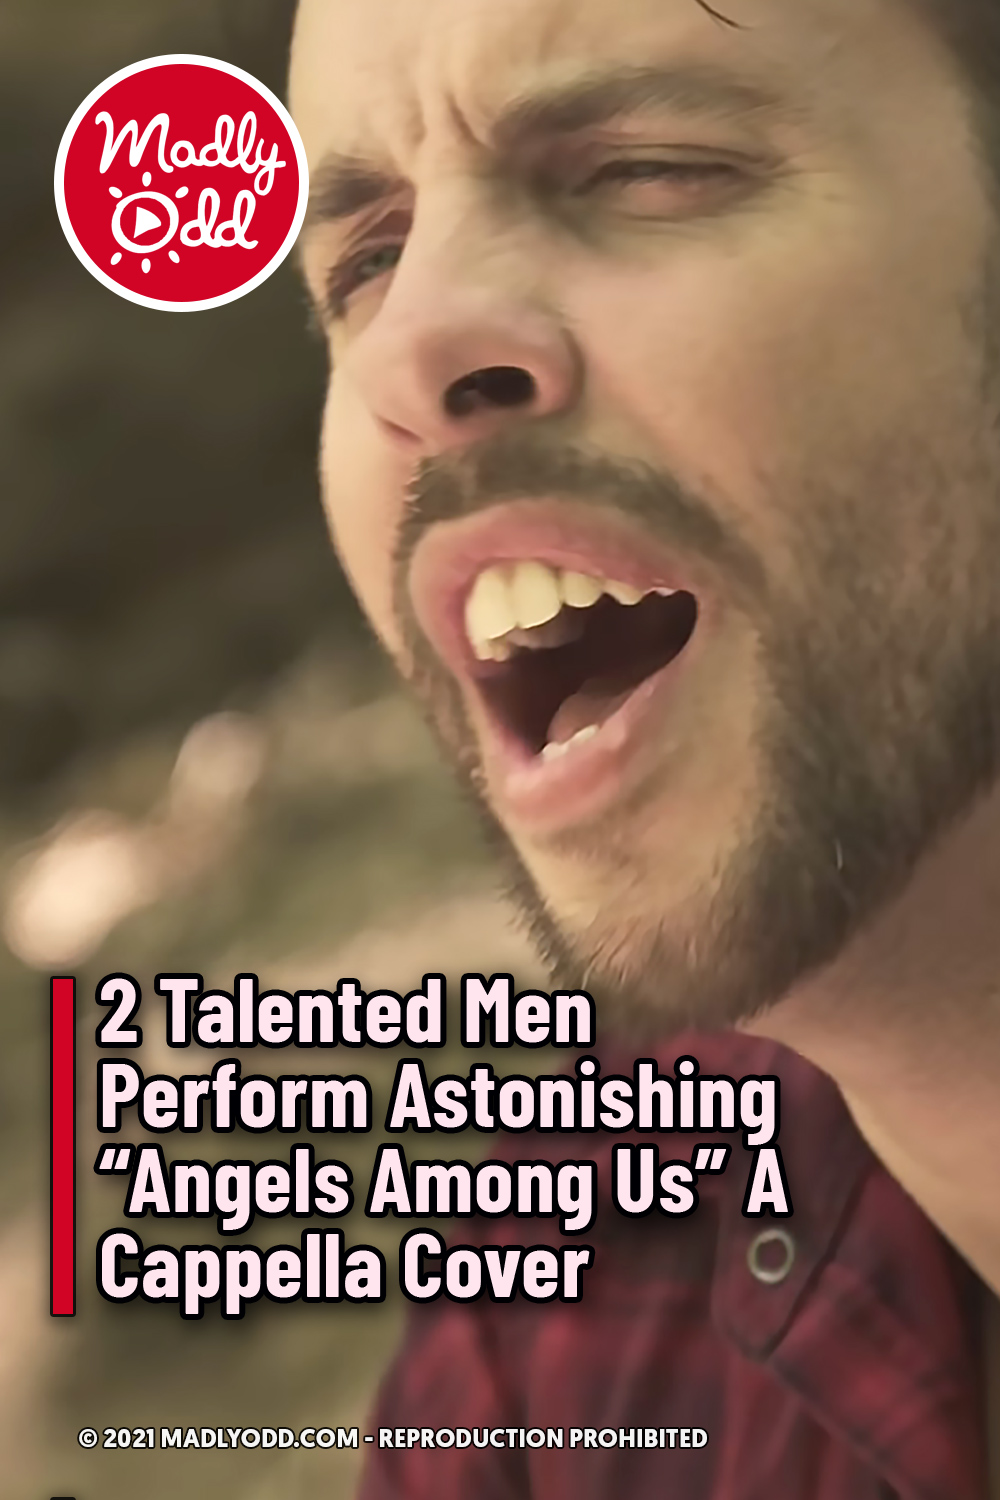 2 Talented Men Perform Astonishing “Angels Among Us” A Cappella Cover